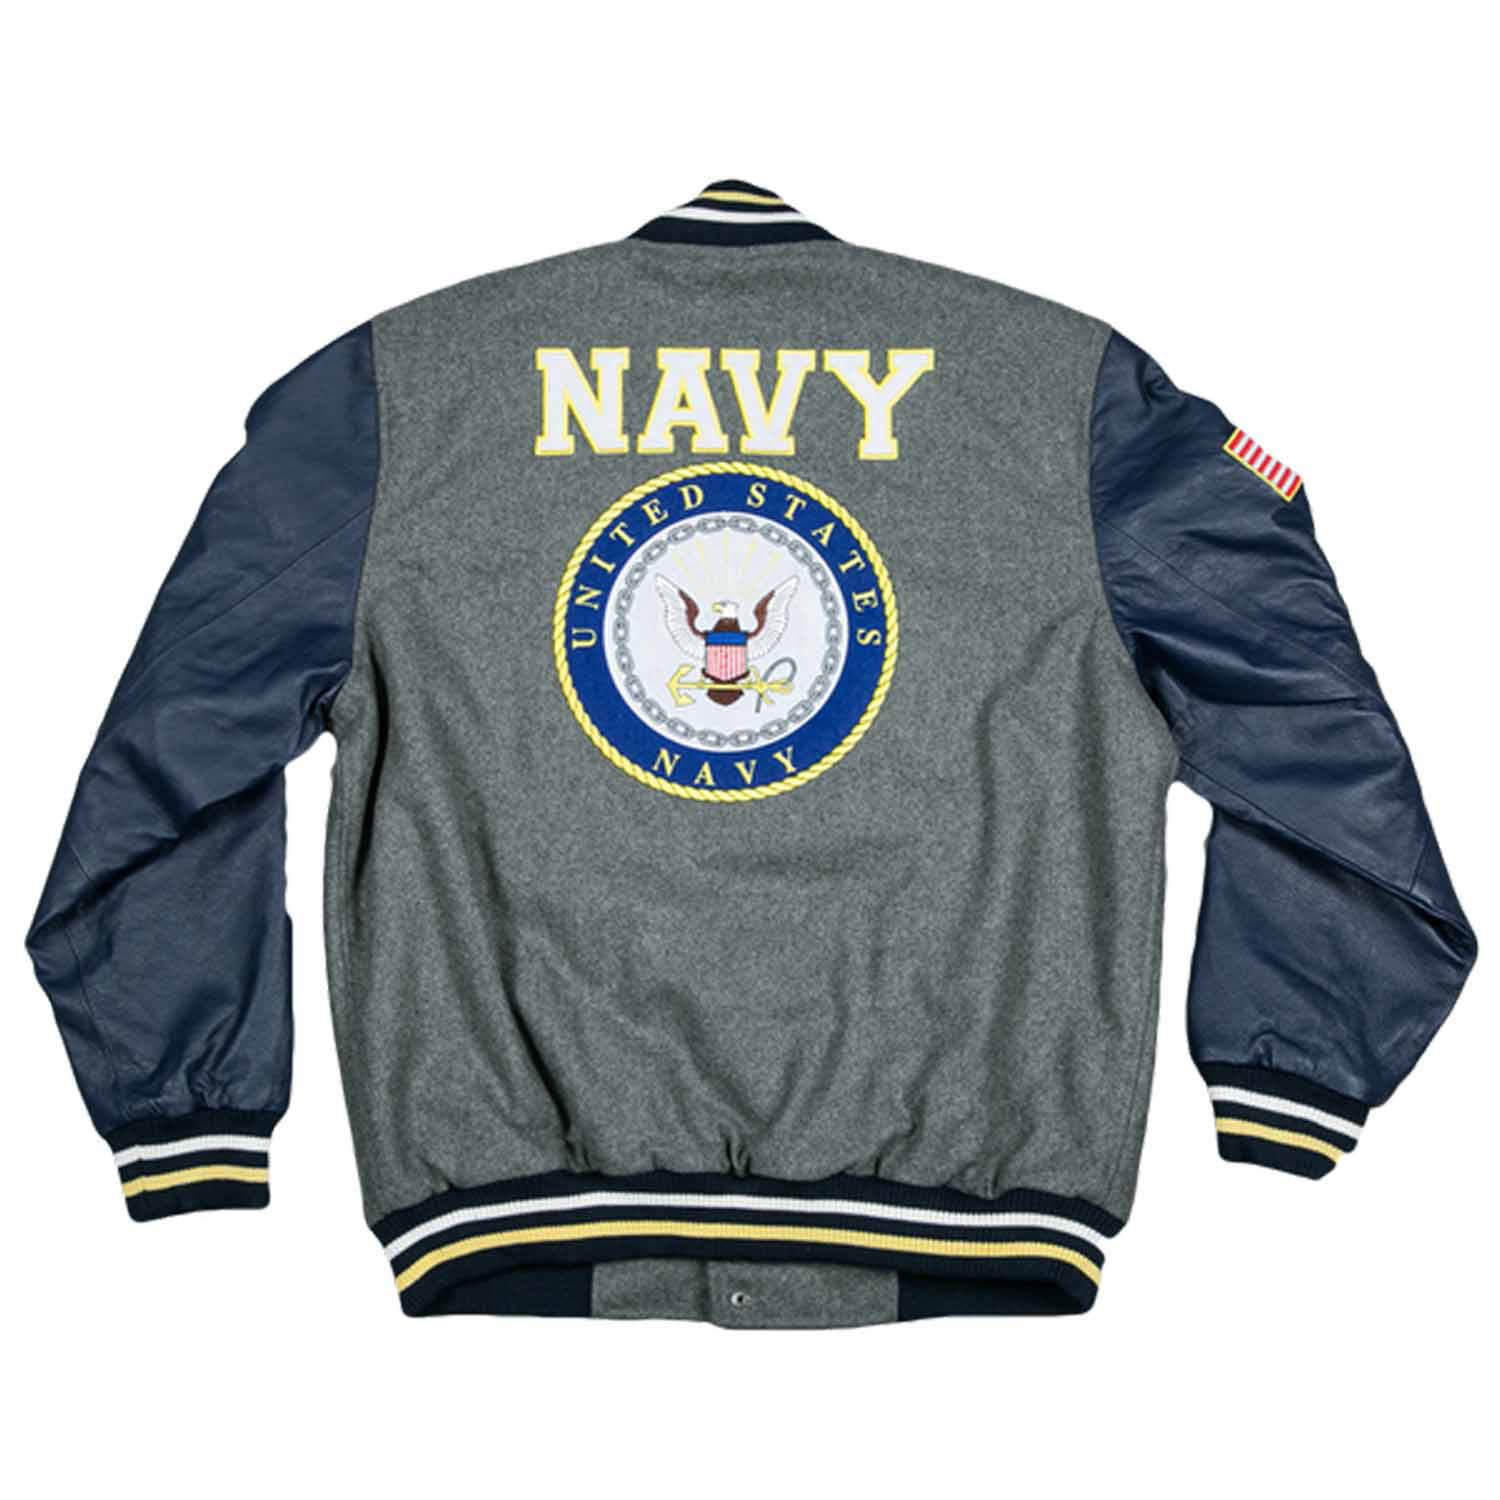 JWM Military Mens Leather Polyester Embroidered Varsity Jacket (Navy /  Grey-Navy, XX-Large)